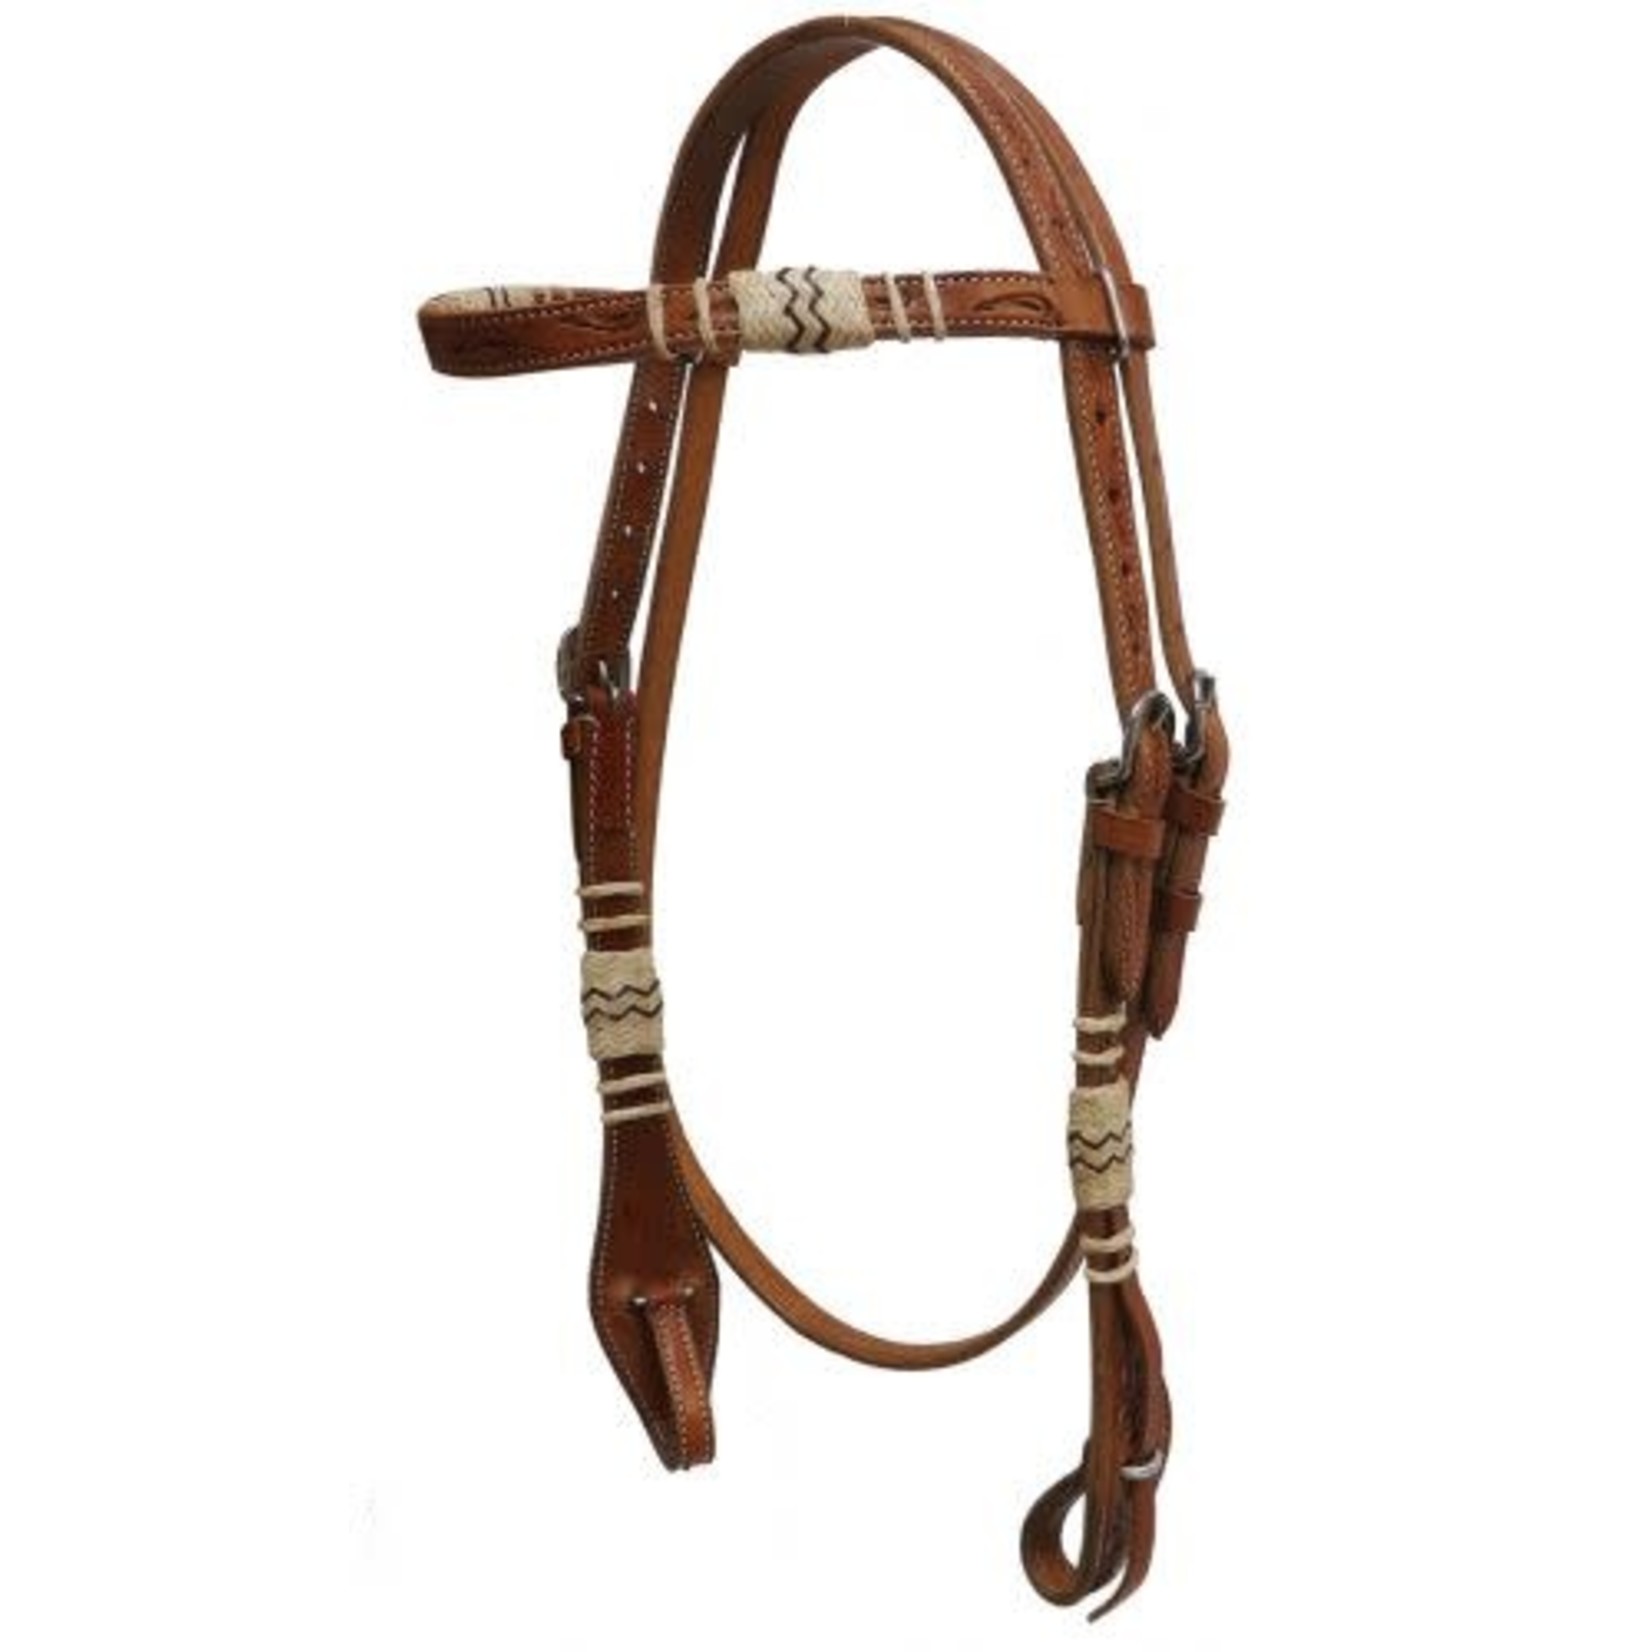 Showman Double stitched floral tooled rawhide braided leather headstall with reins